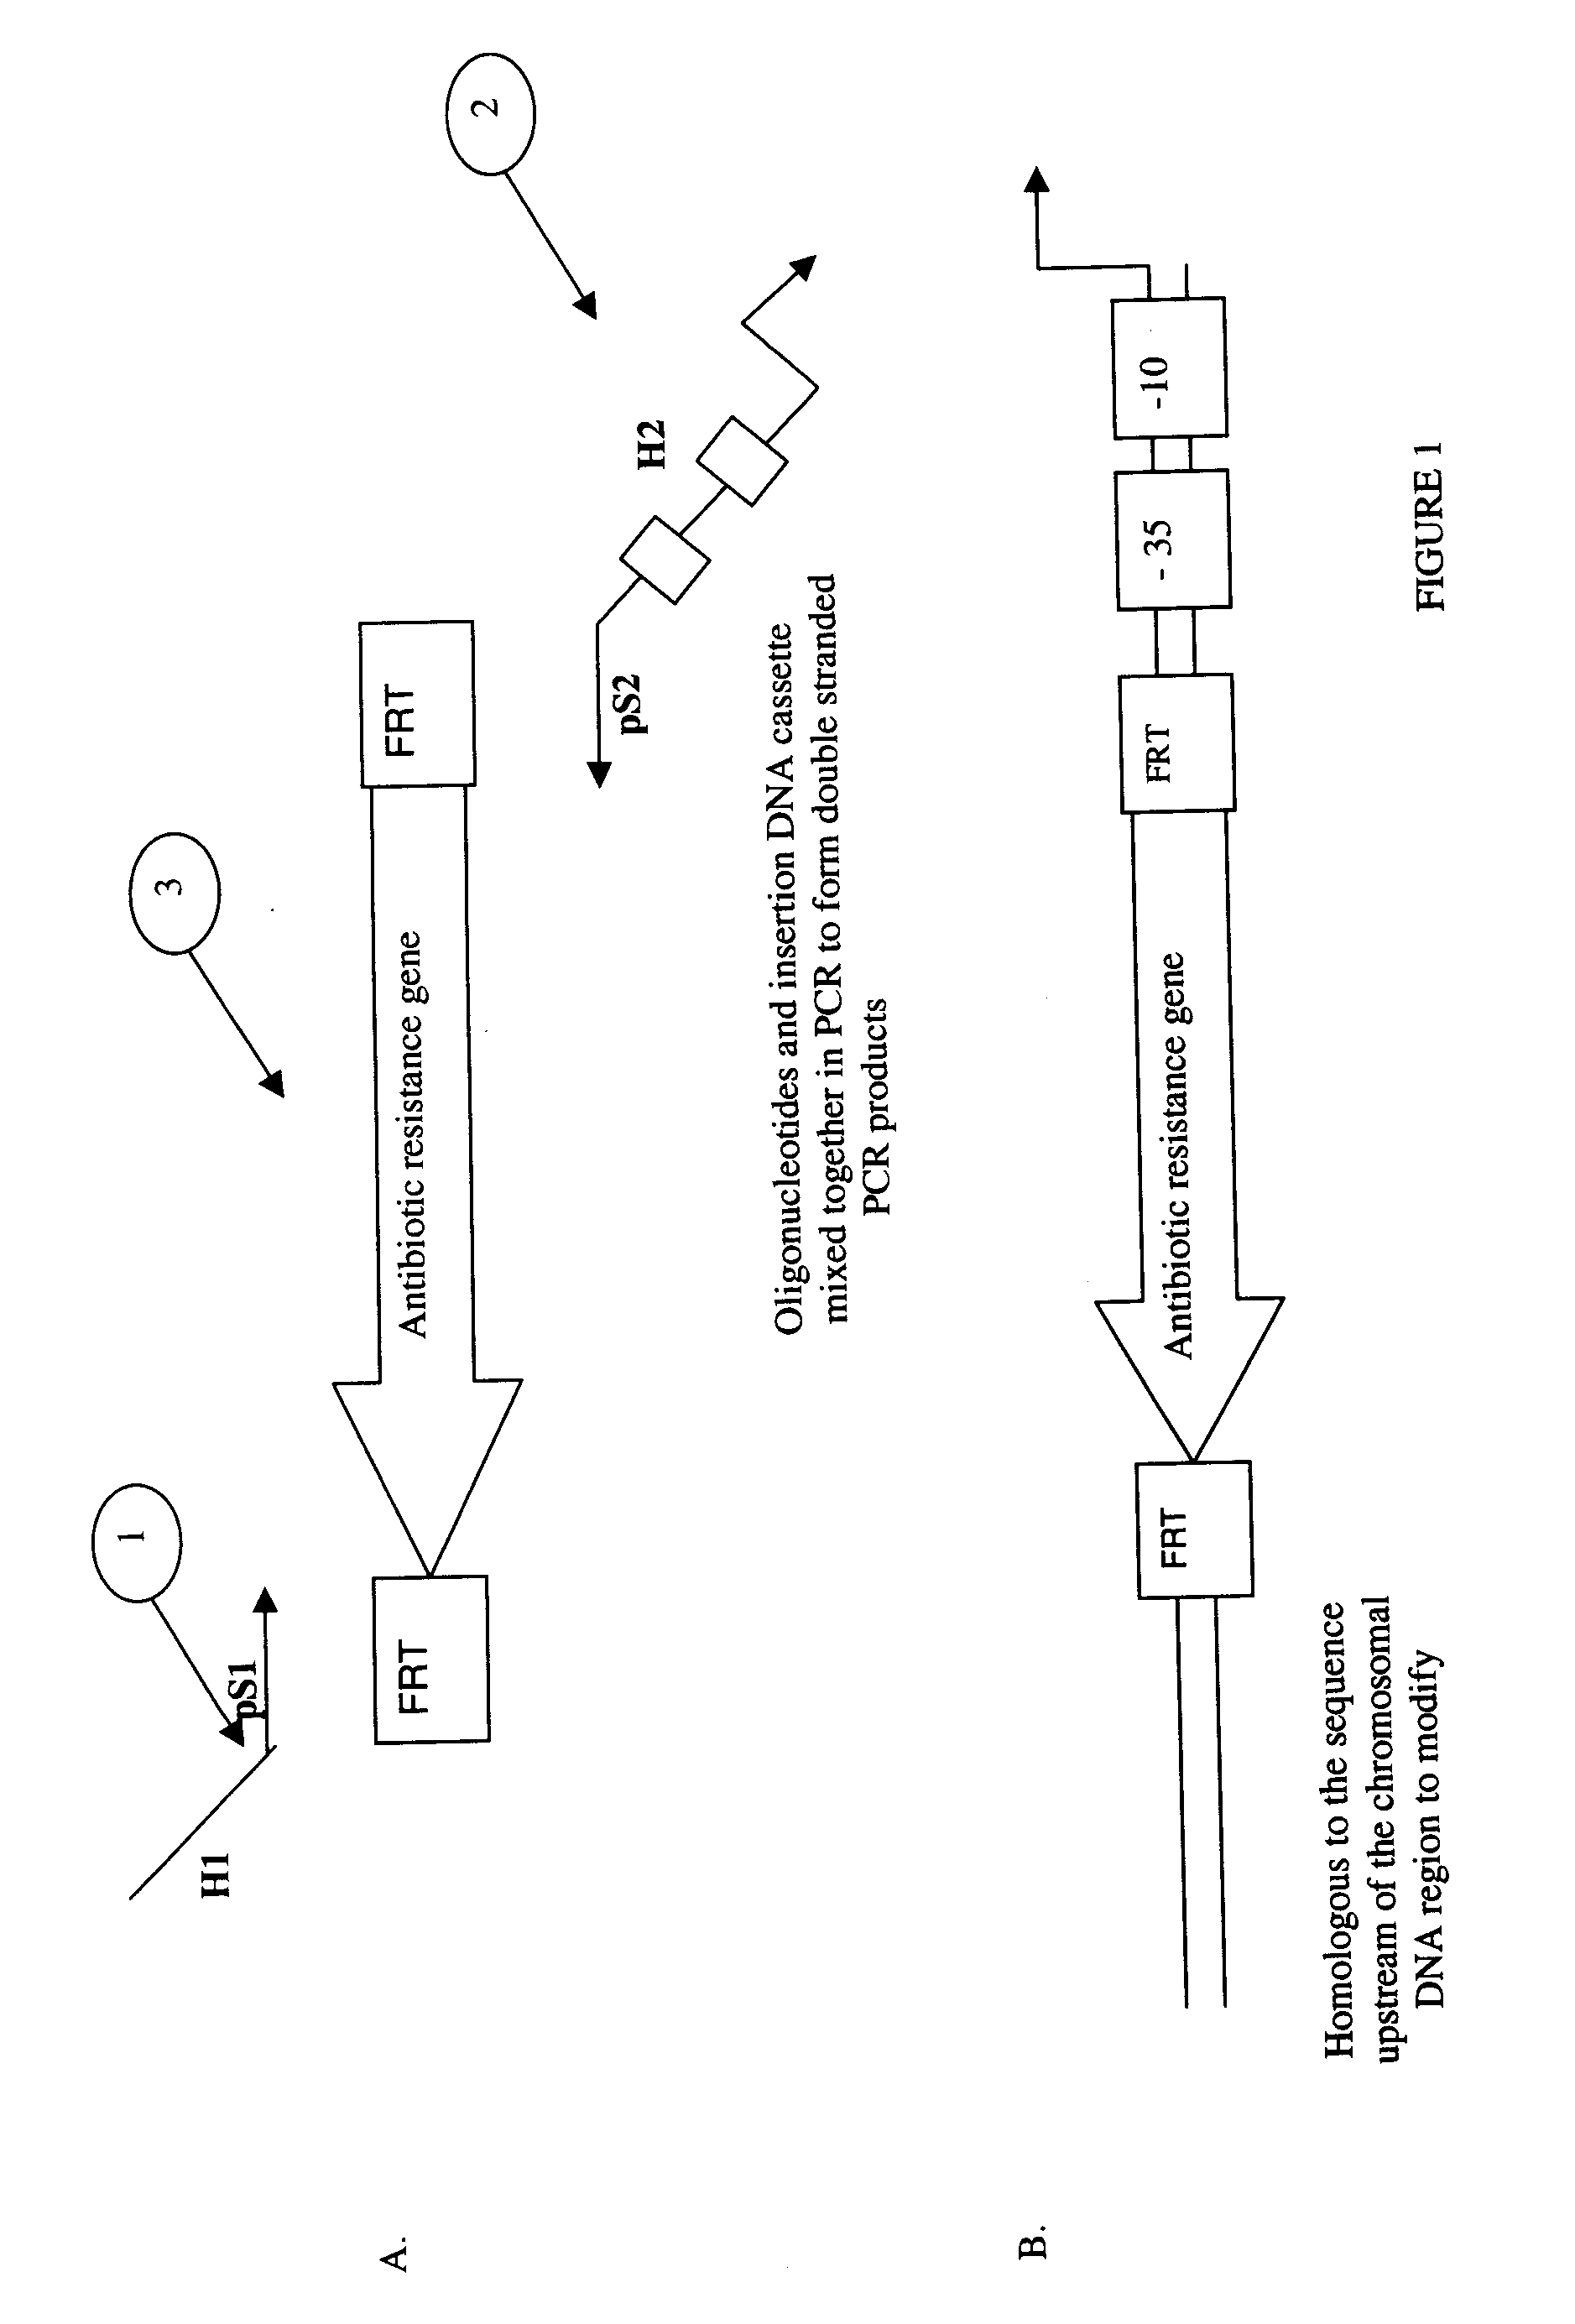 Method of Creating a Library of Bacterial Clones with Varying Levels of Gene Expression